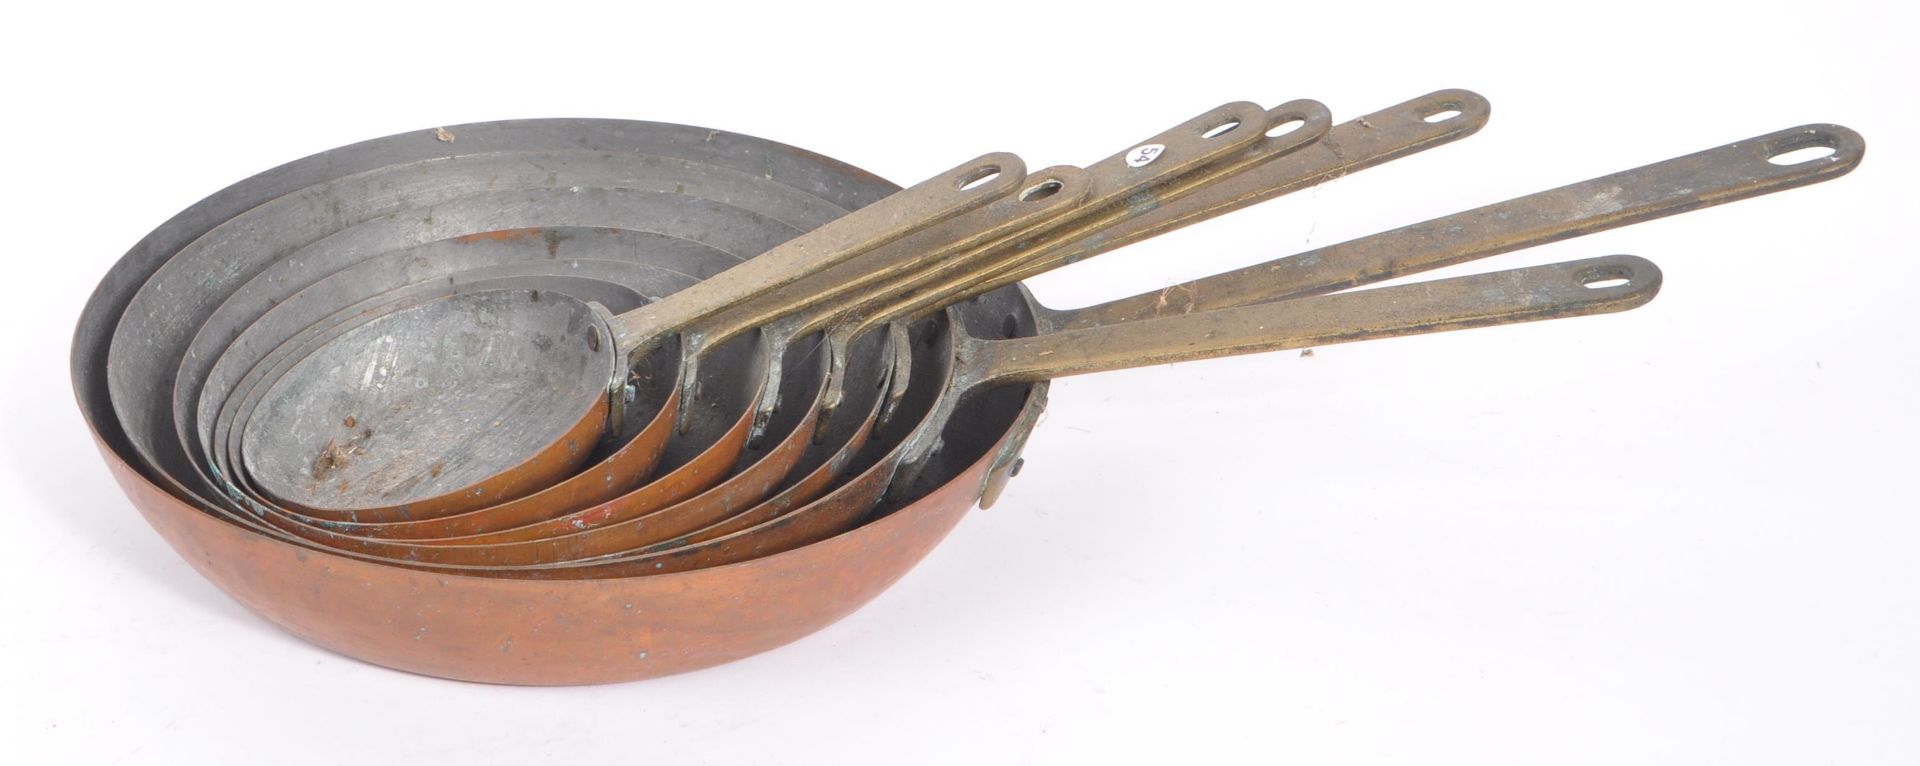 COLLECTION OF 19TH CENTURY VICTORIAN COPPER FRYING PANS - Image 6 of 7